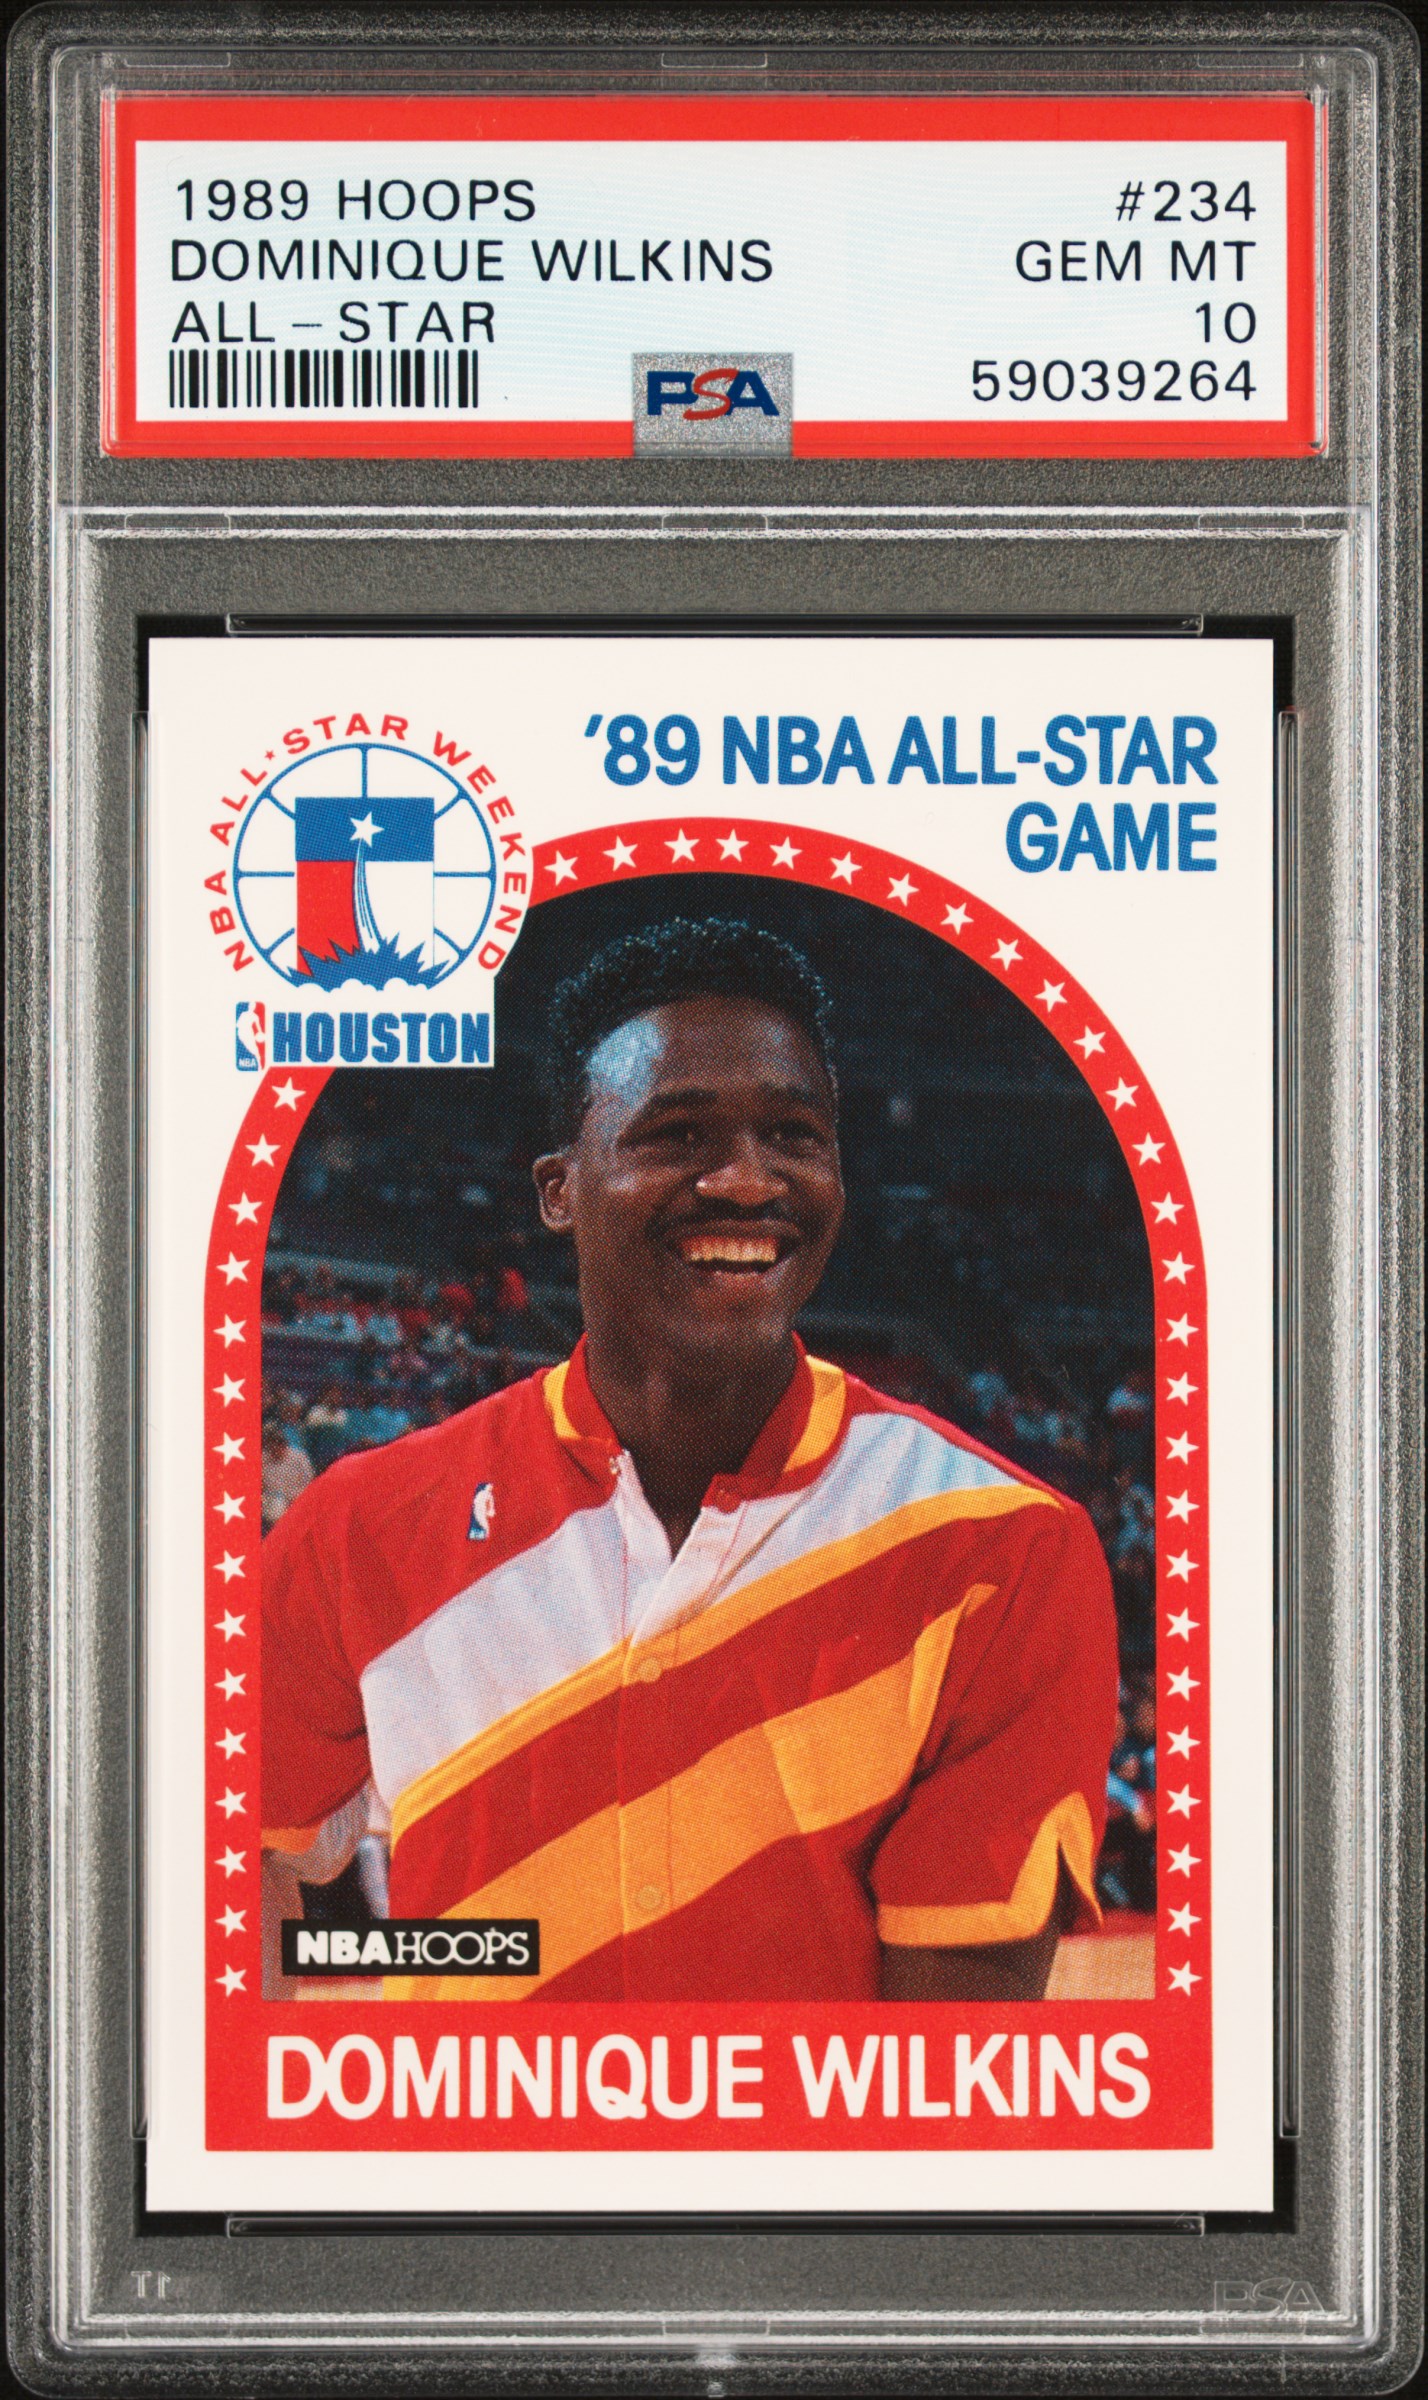 1989 Hoops 234 Dominique Wilkins All-Star PSA 10